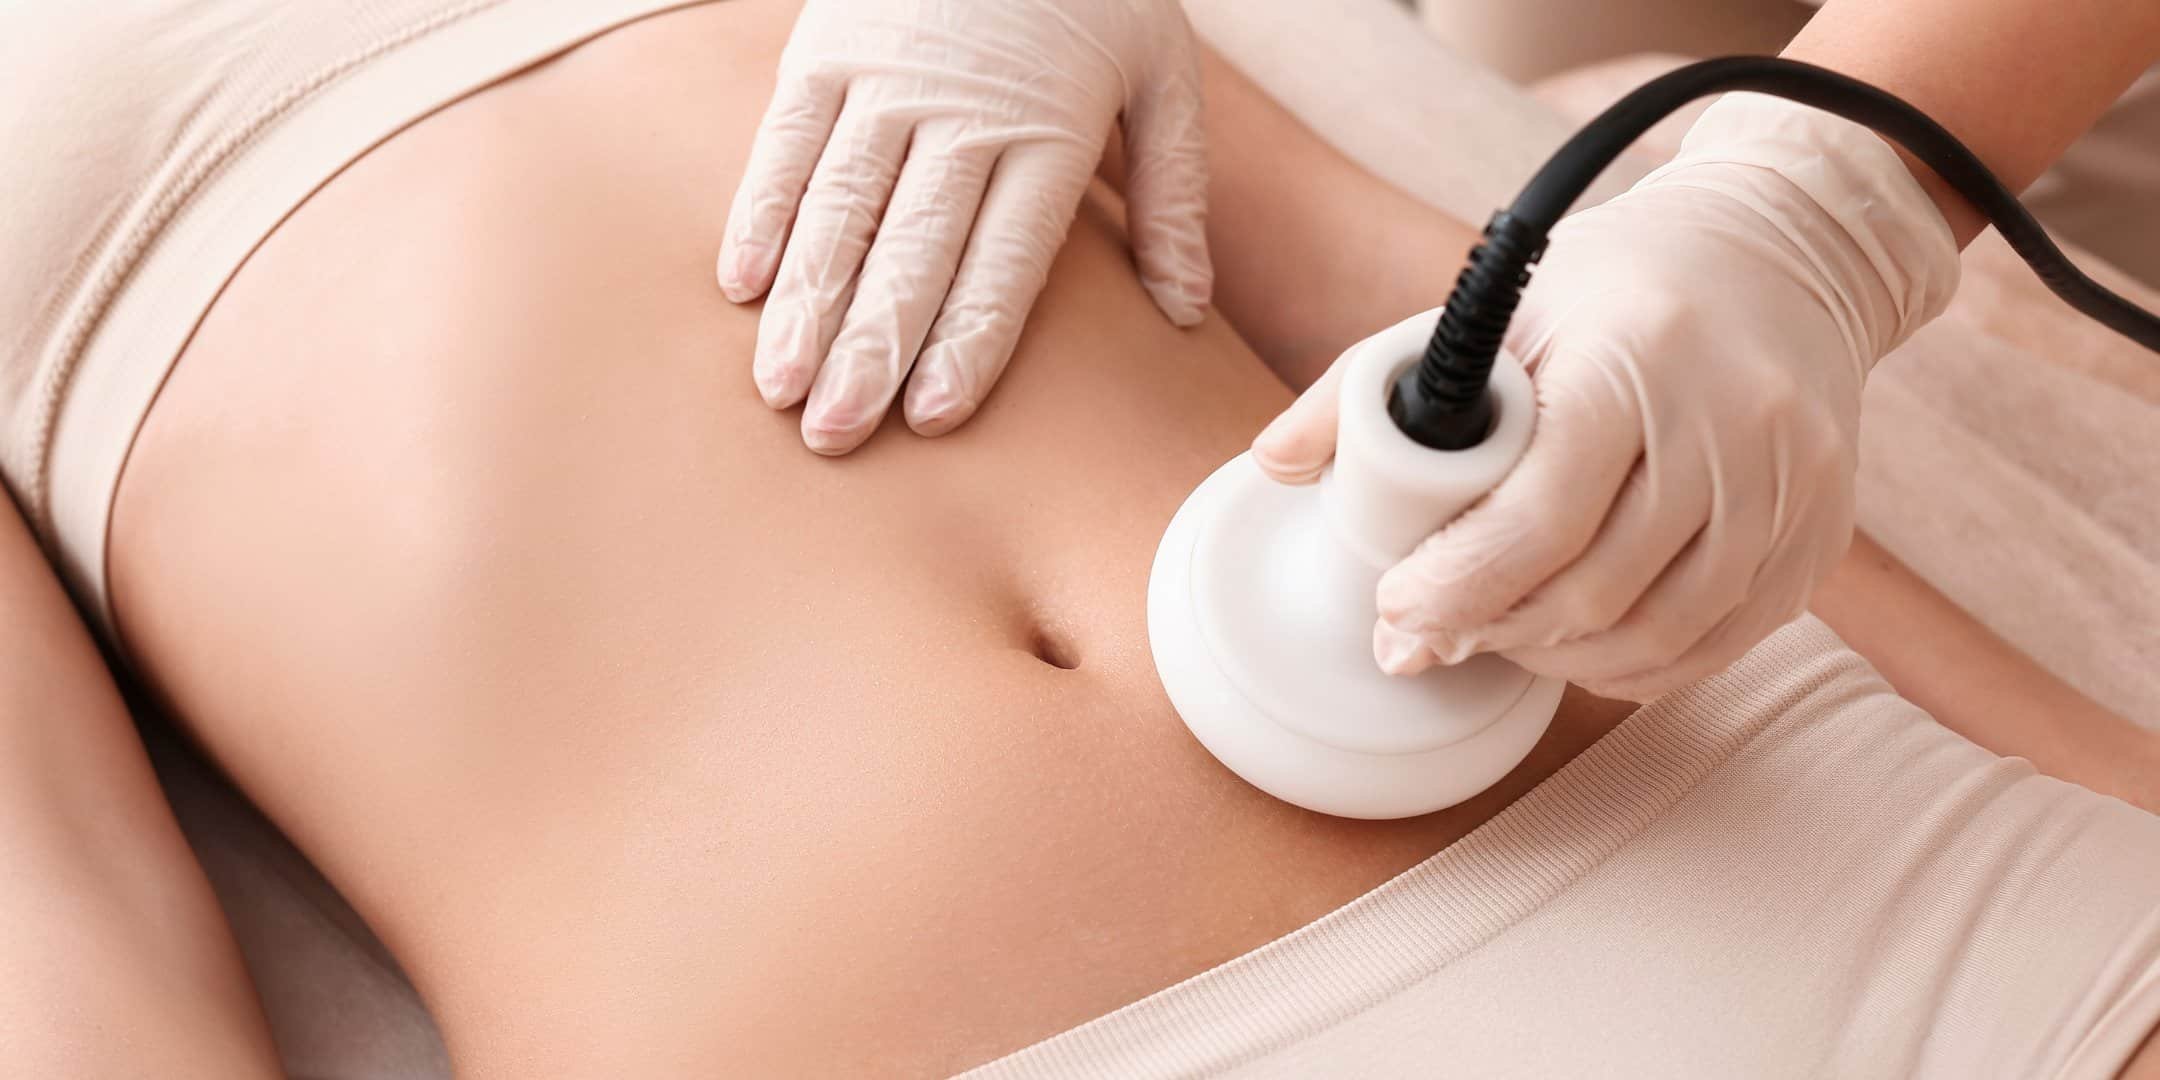 Does fat cavitation really work?